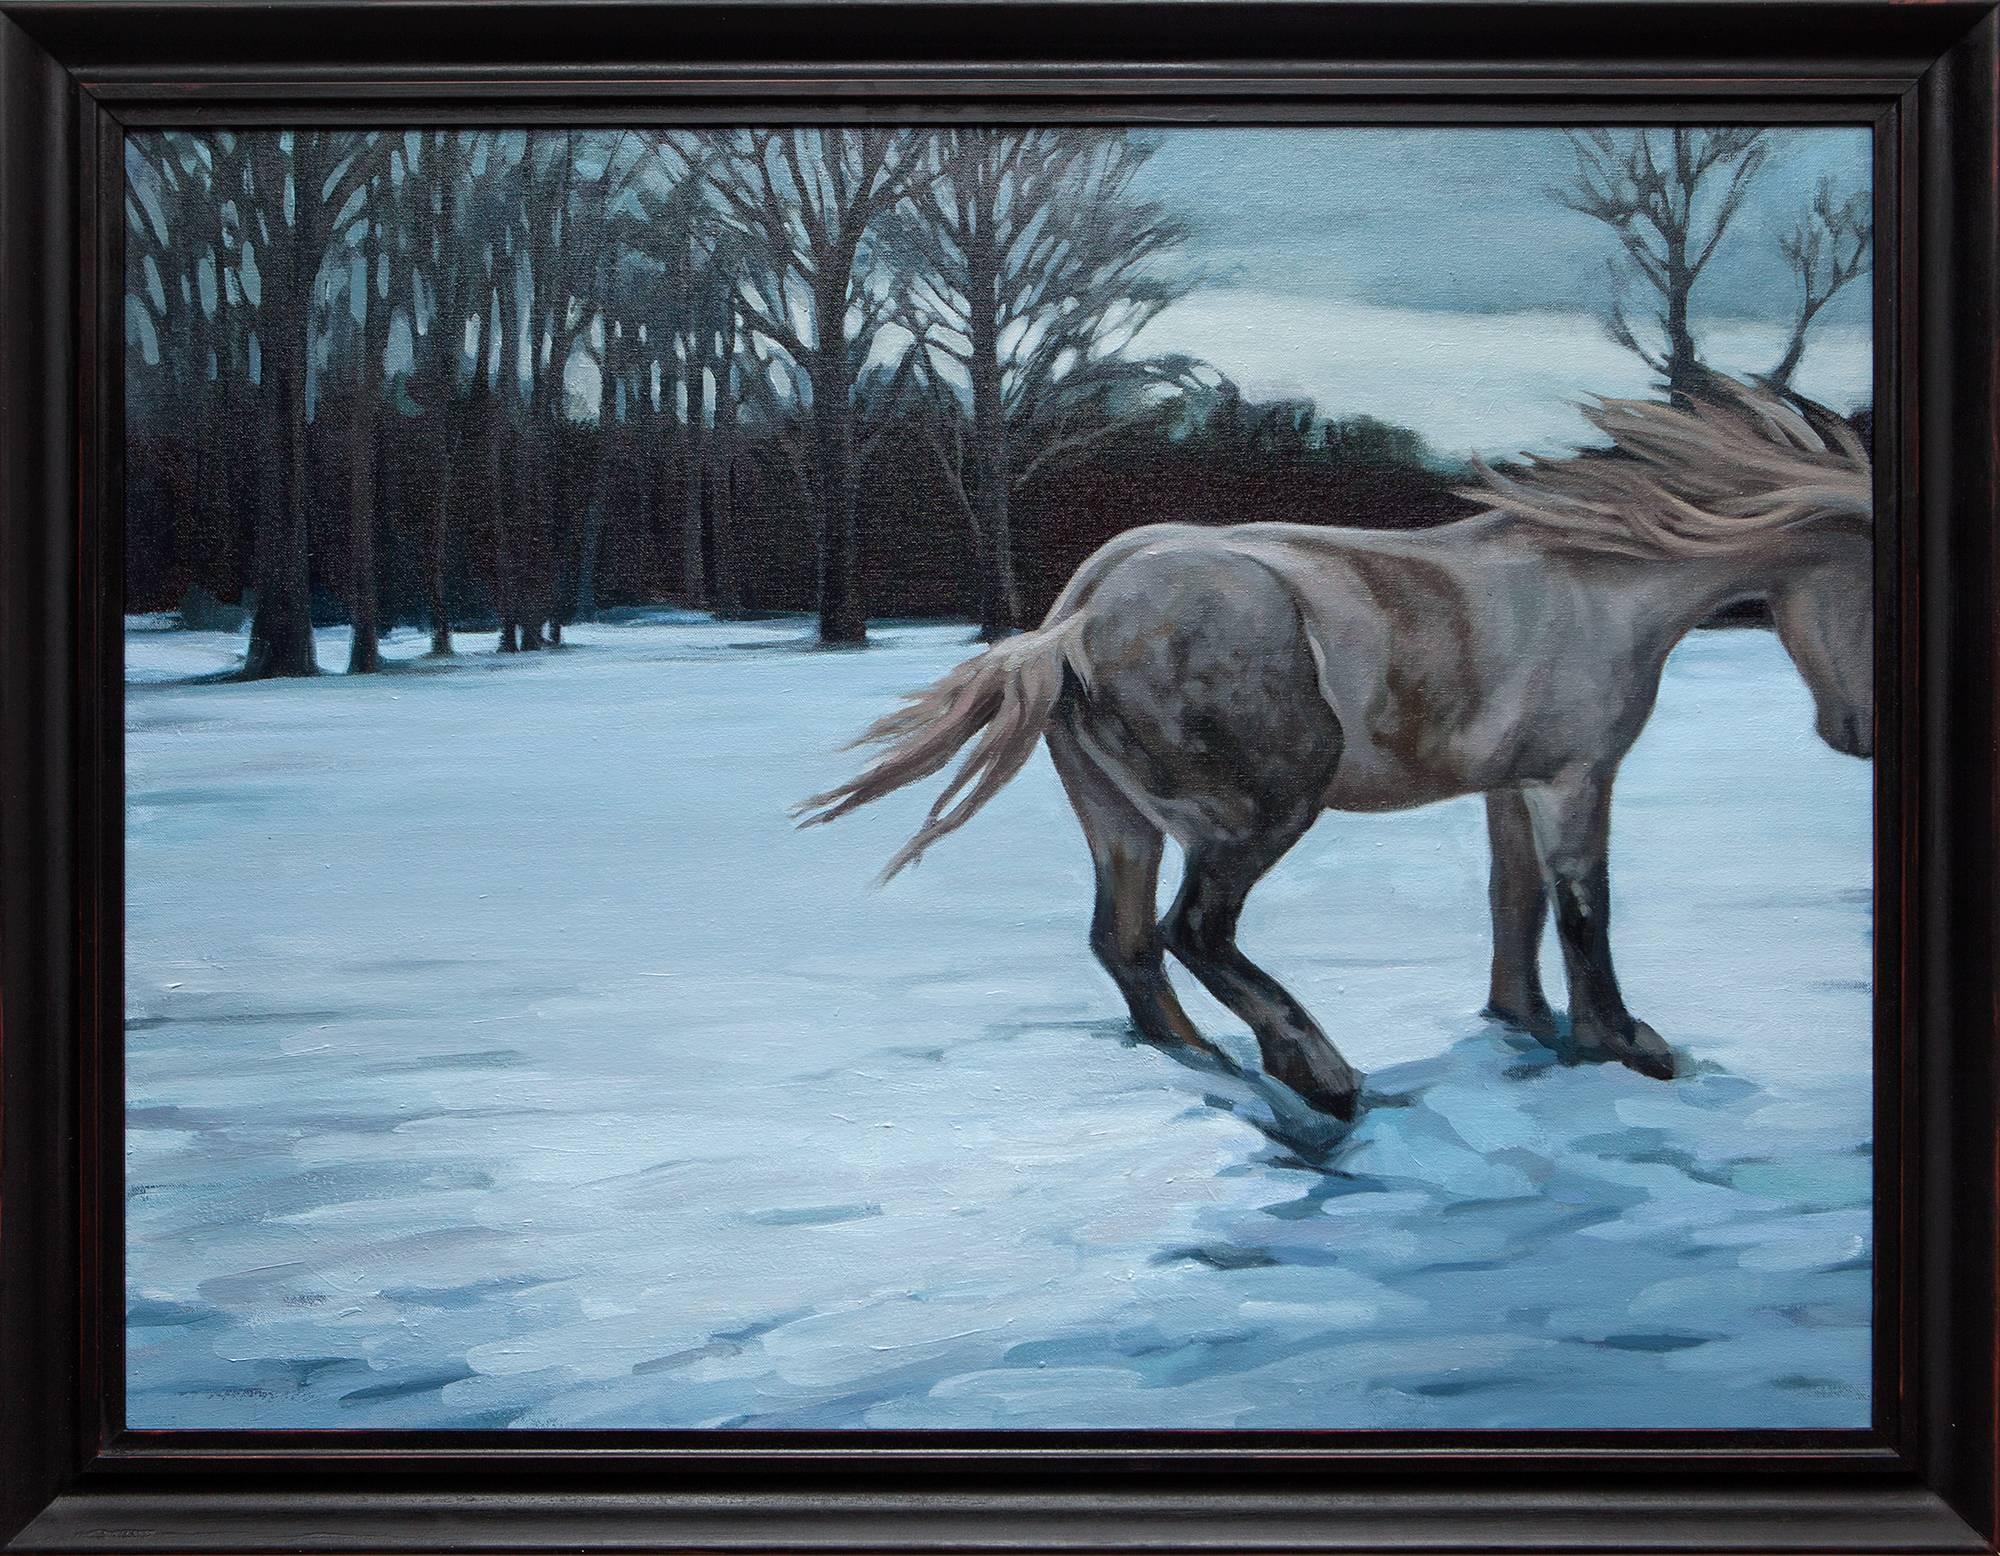 Katherine Fraser Landscape Painting - "Alive and Well", Winter Landscape with Horse Oil Painting, Snow Scene